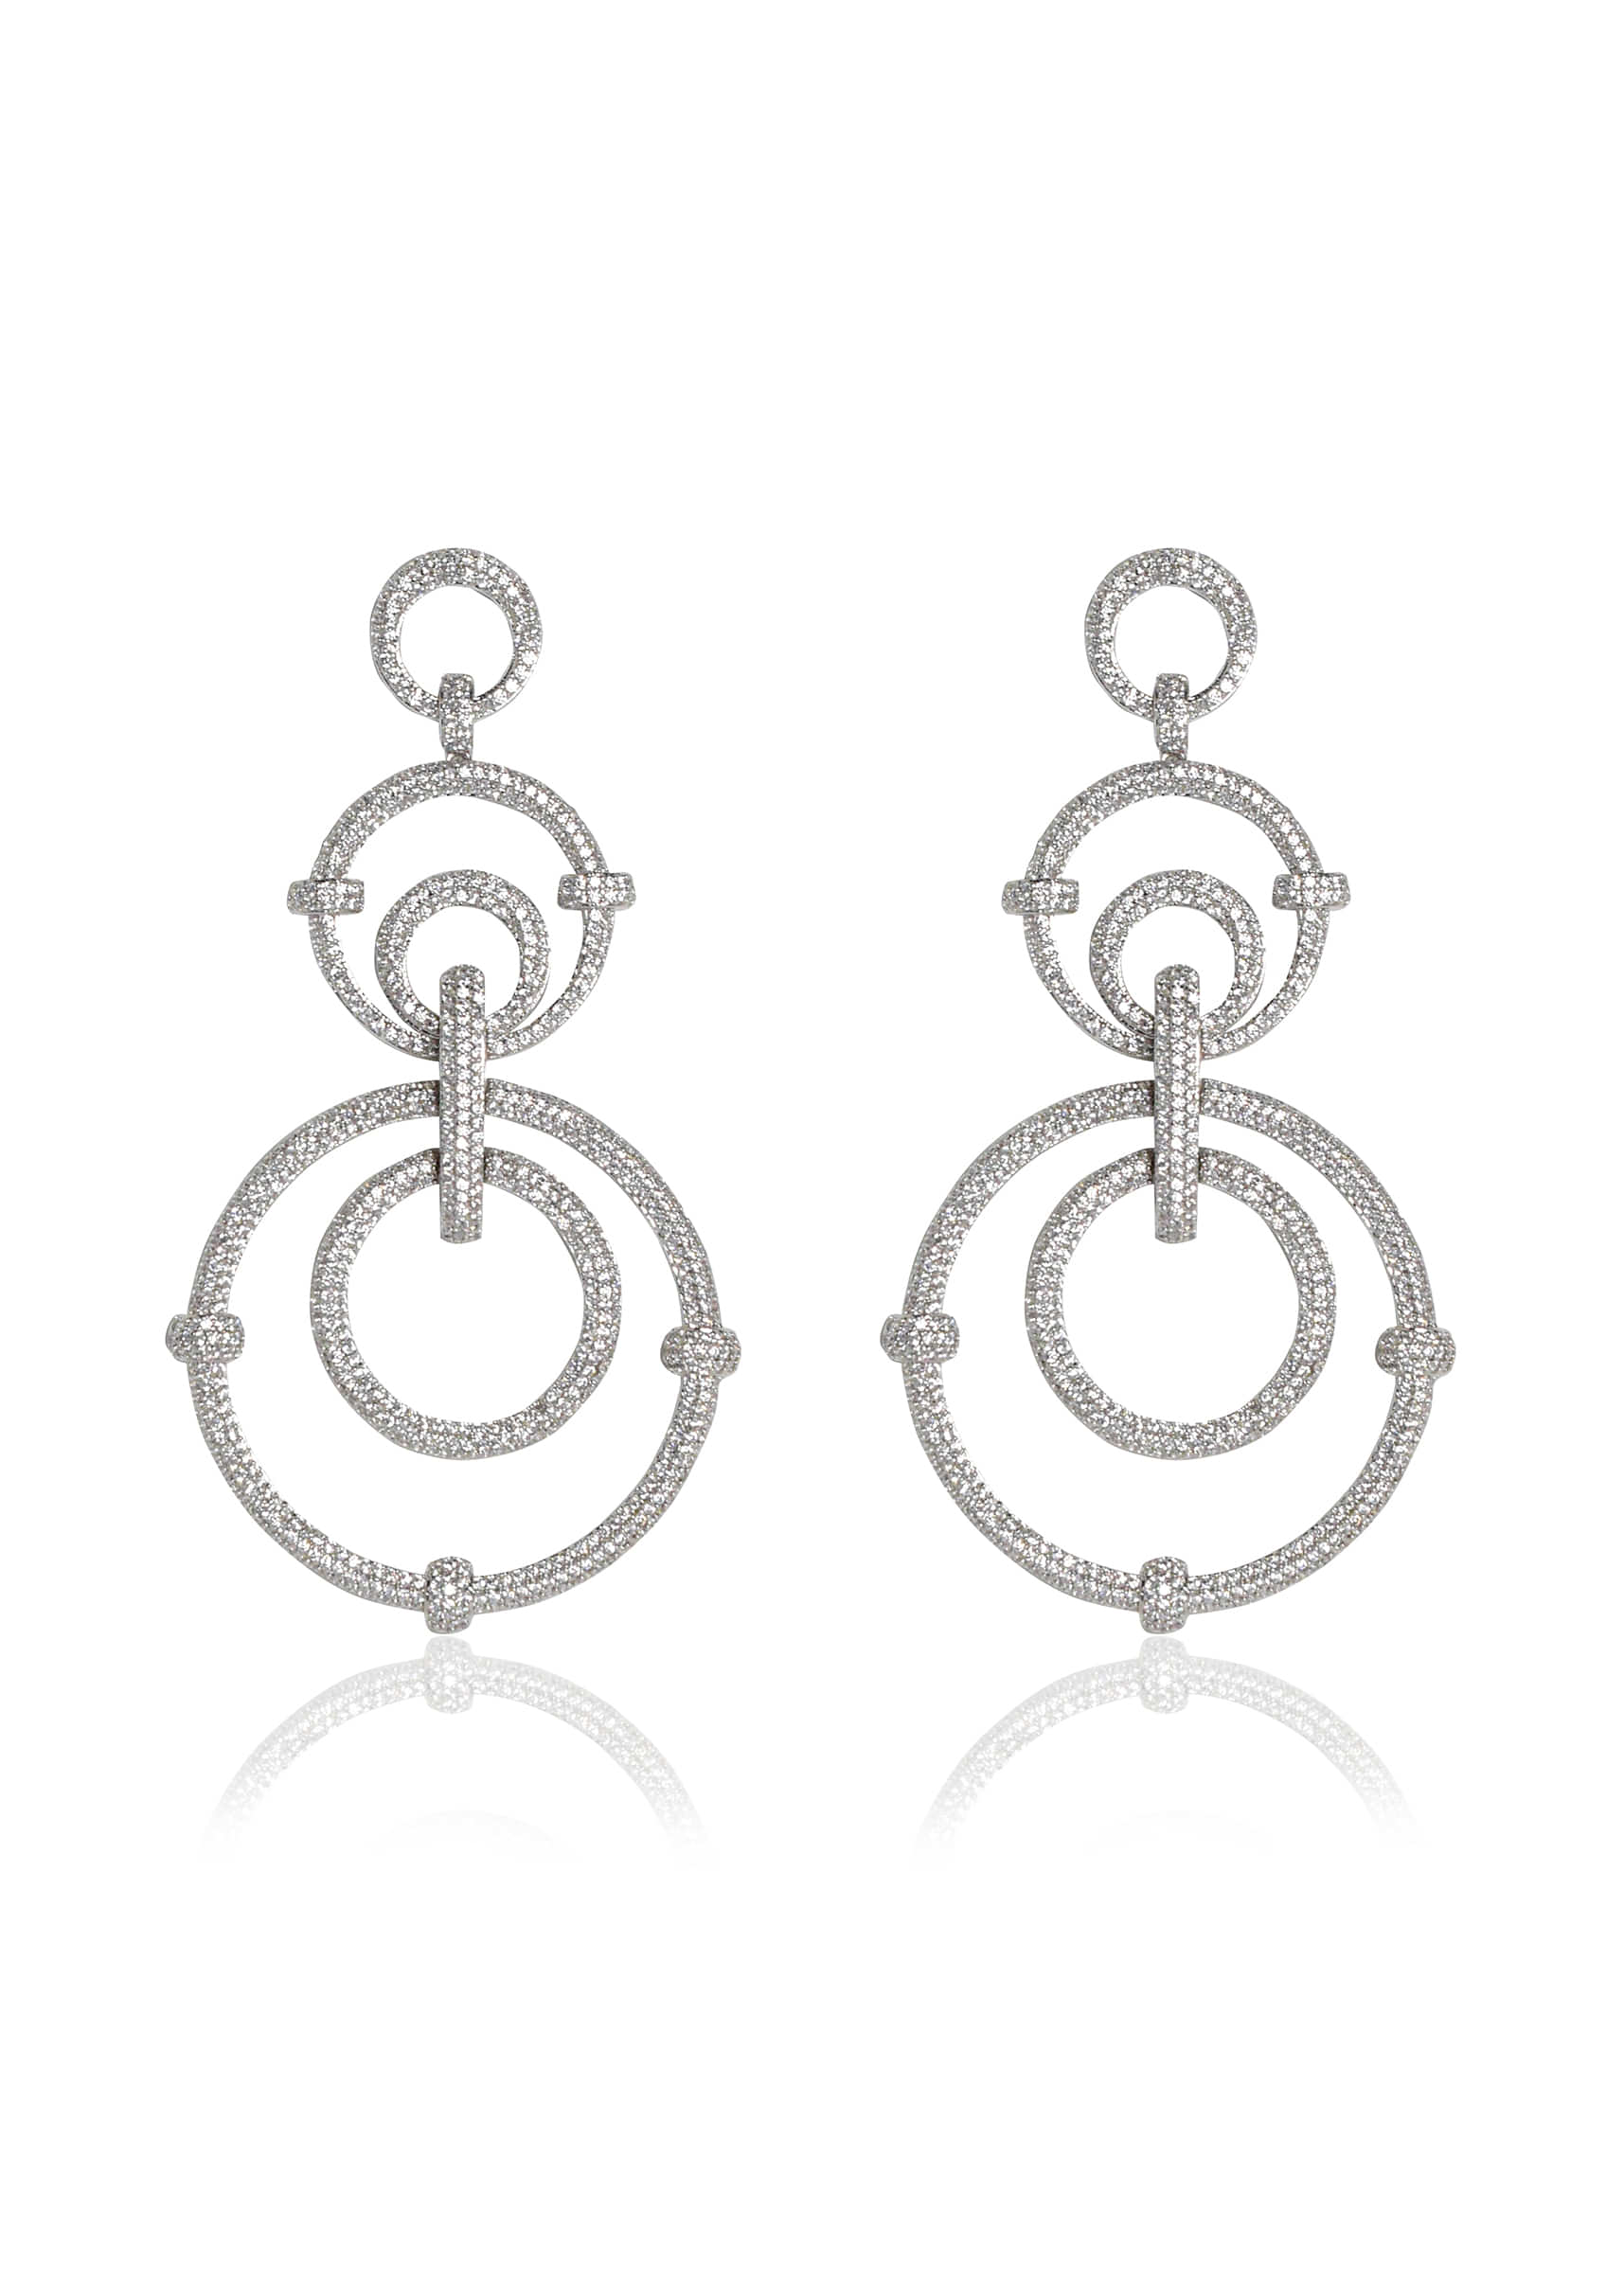 Silver Chandelier Earrings With Faux Diamonds Studded In Round Design By Tizora